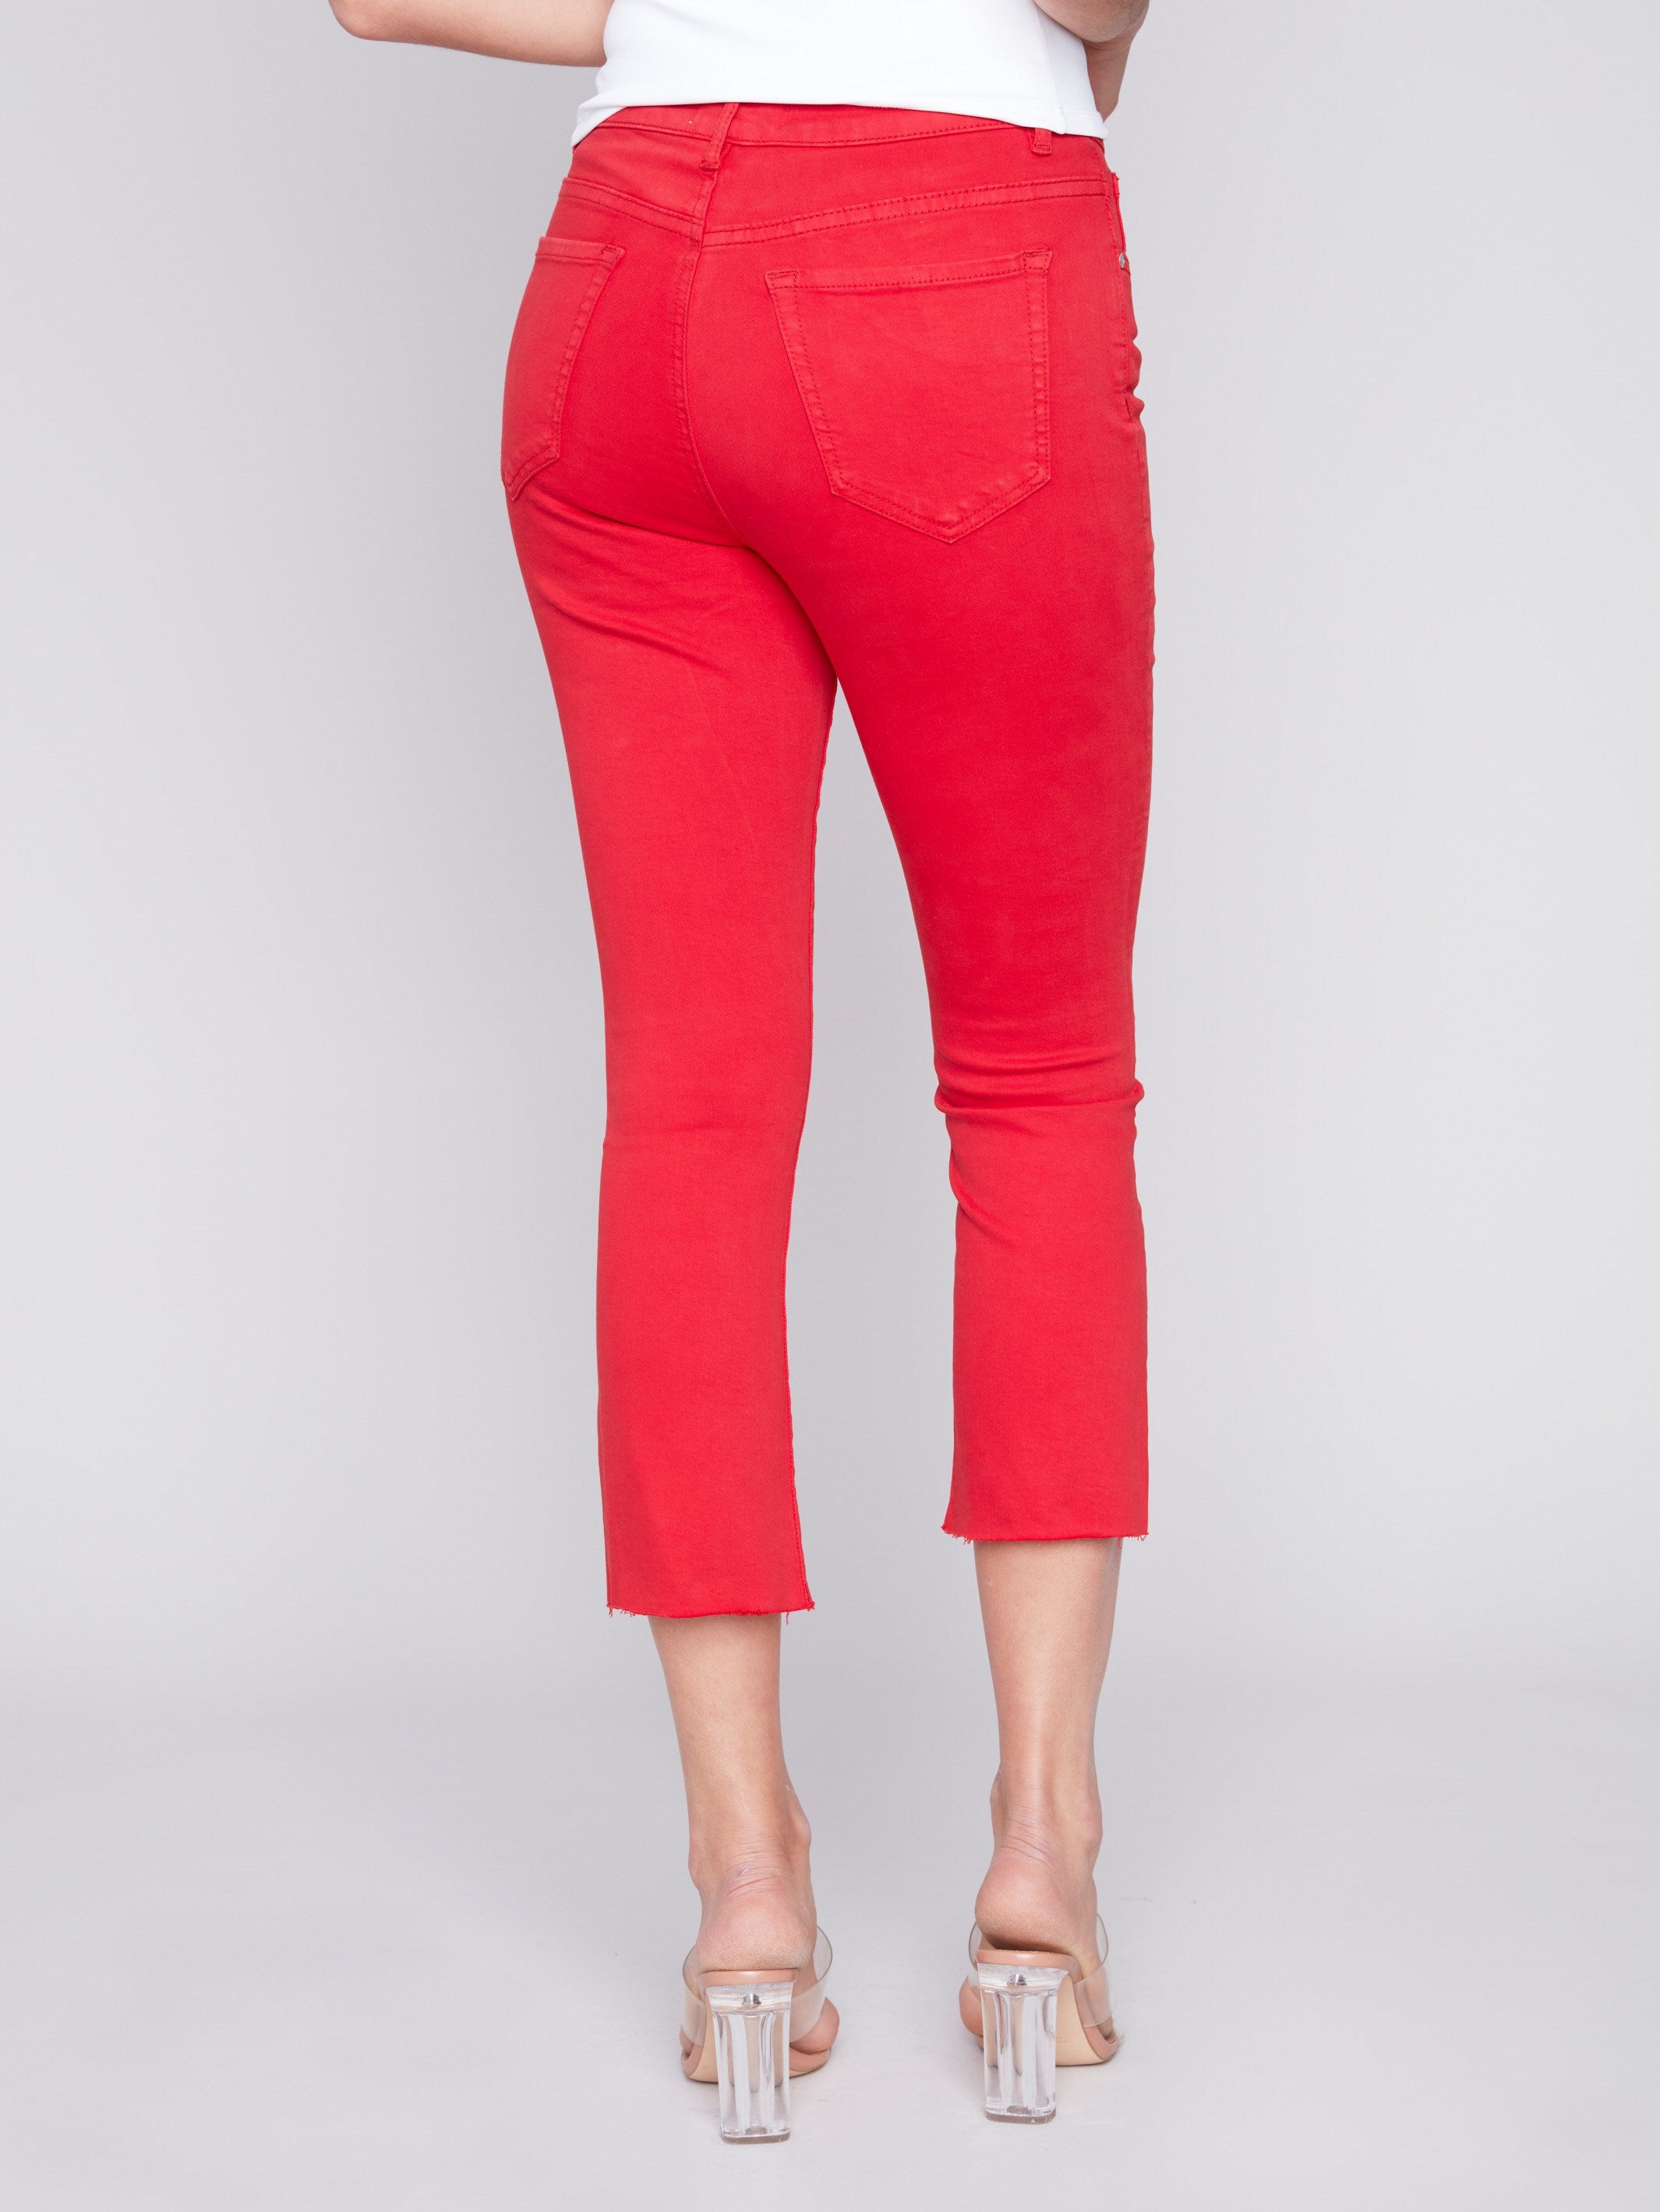 Charlie B Cropped Bootcut Twill Pants with Asymmetrical Hem - Cherry - Image 3